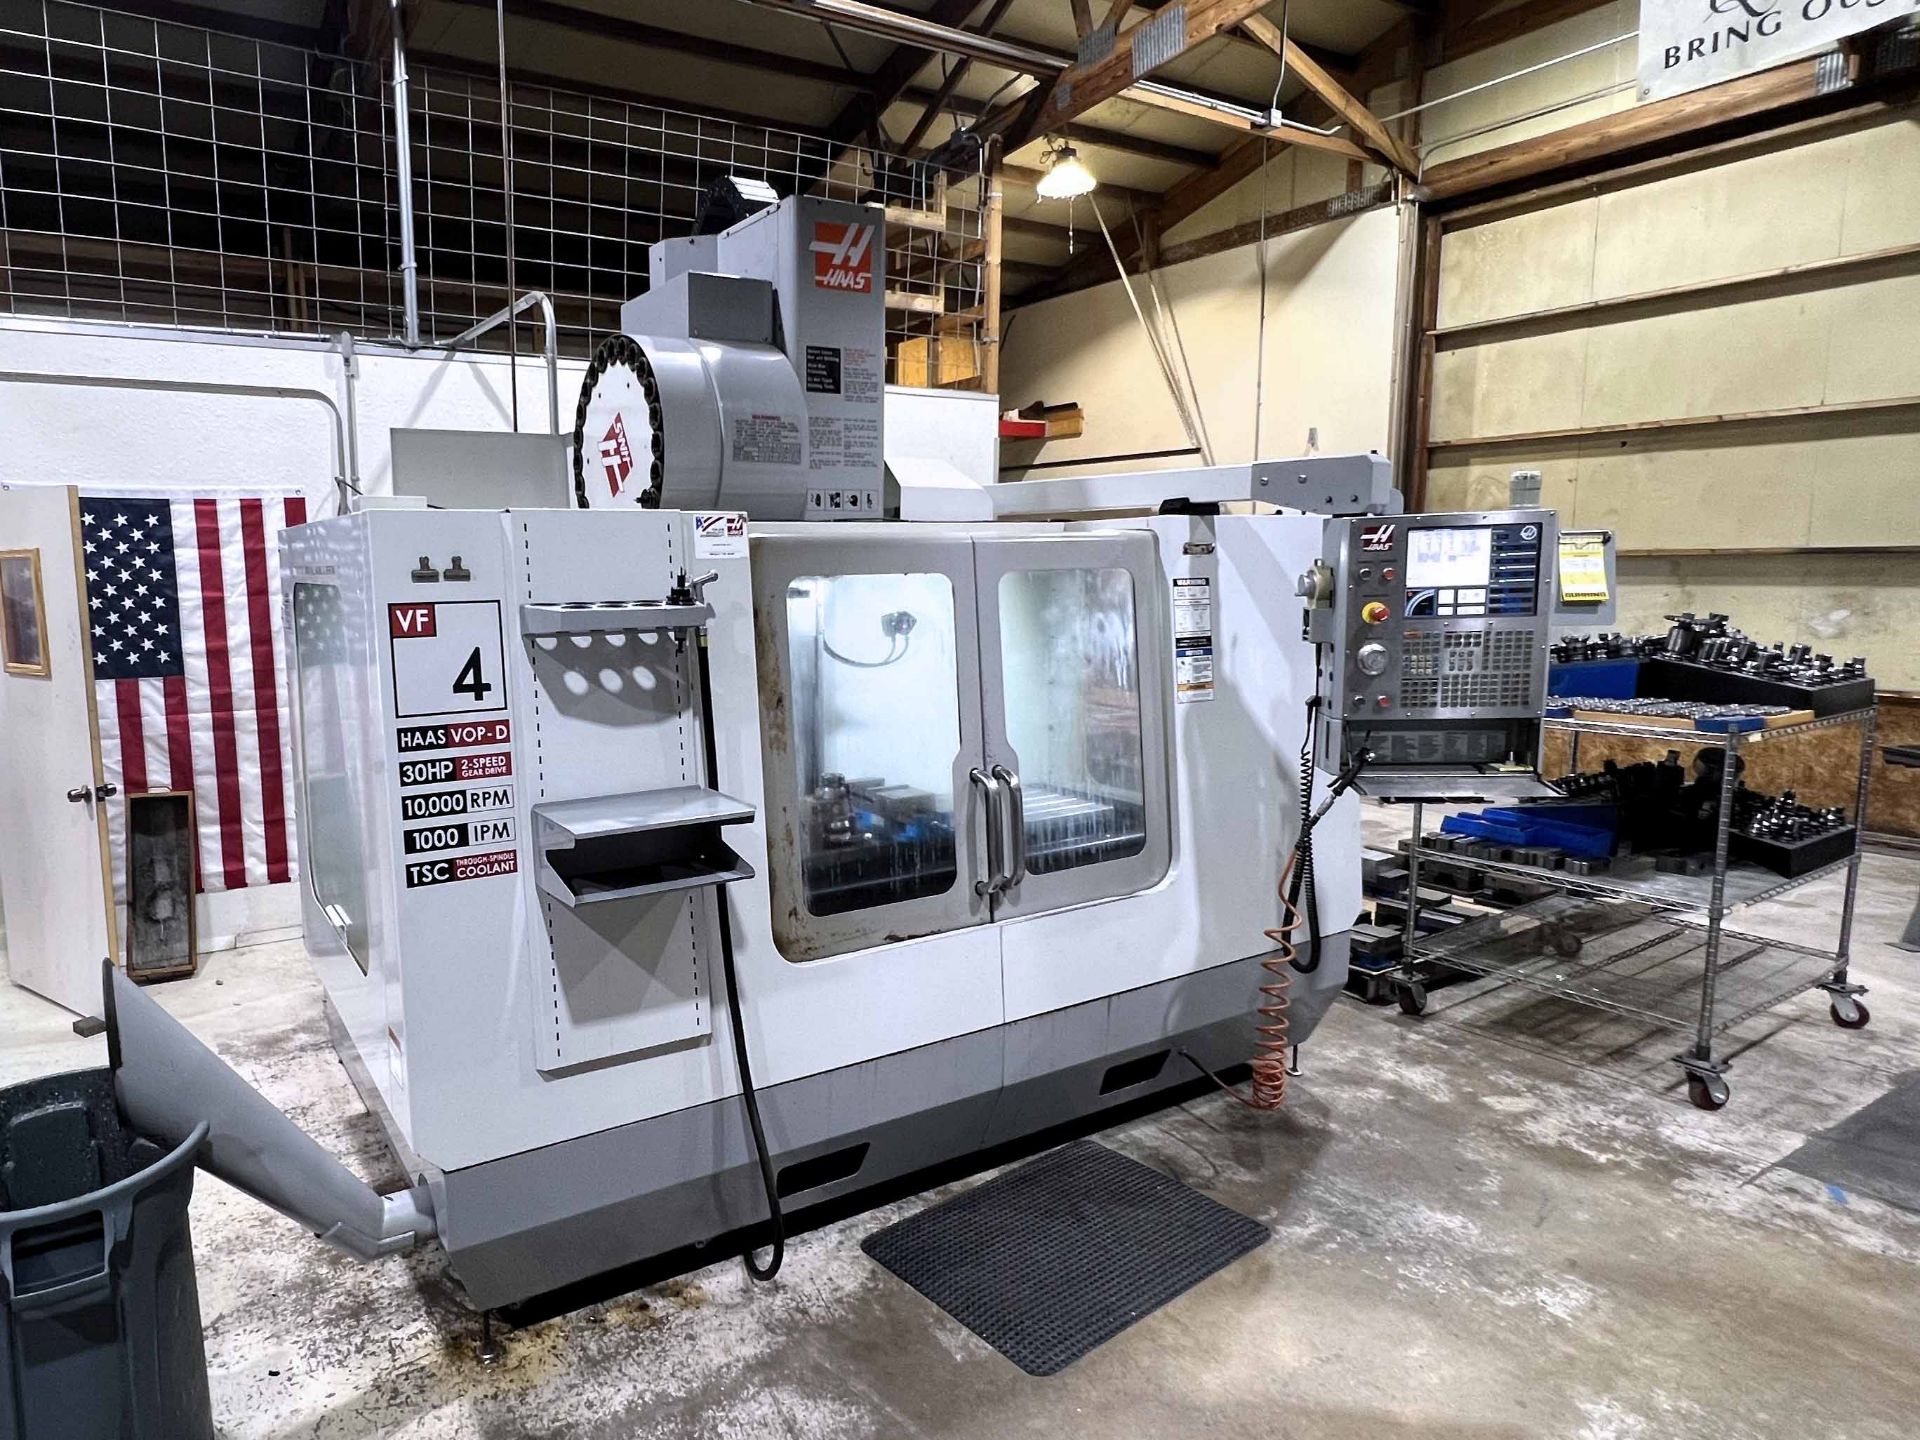 Haas VF-4B Vertical Machining Center (2007) - Image 8 of 10